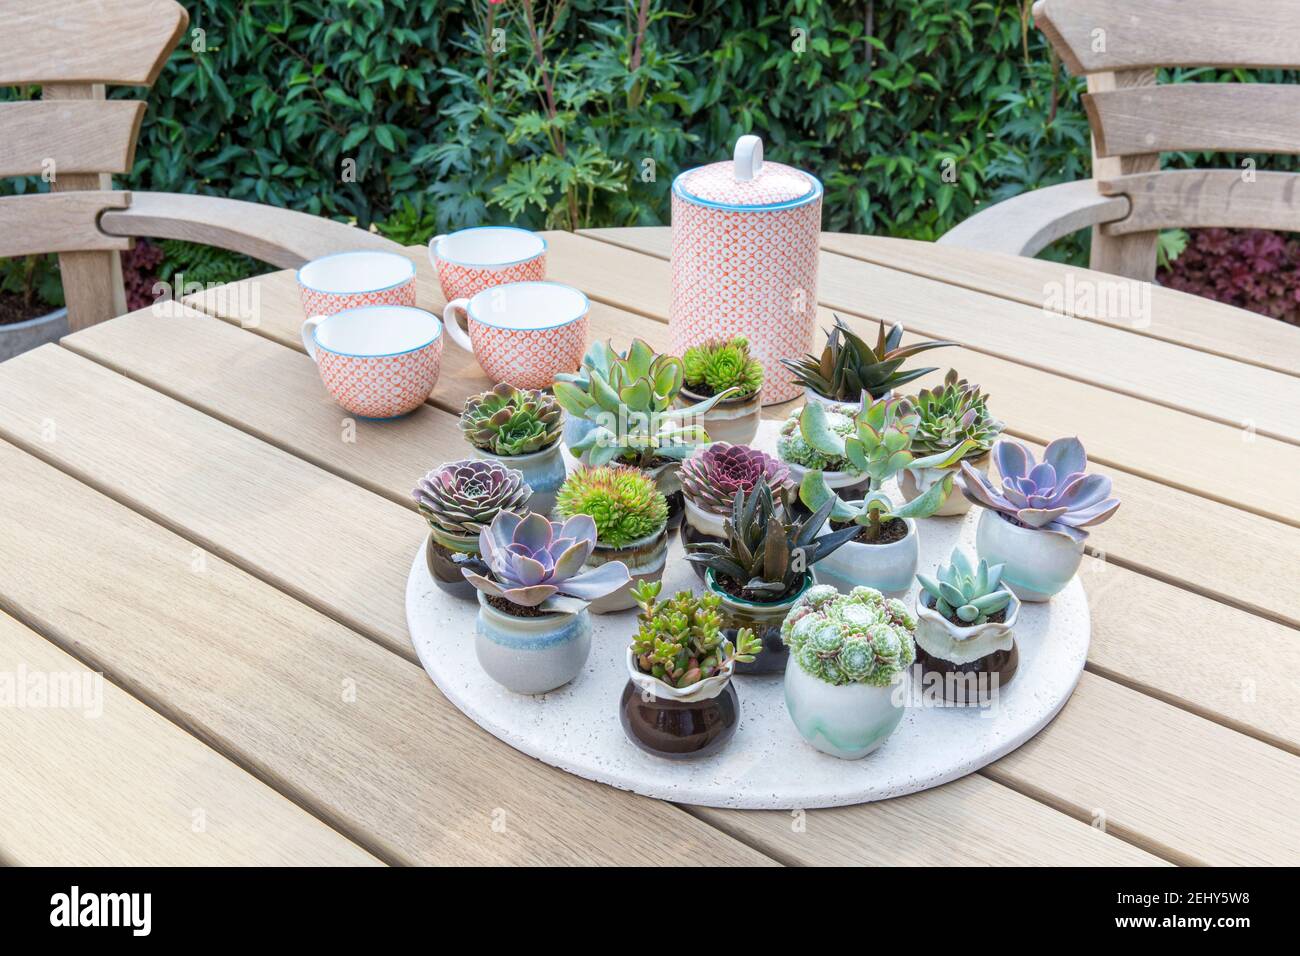 Garden outdoor table dining furniture table with a display of succulents succulent and cacti plants in small ceramic pots display  UK Stock Photo